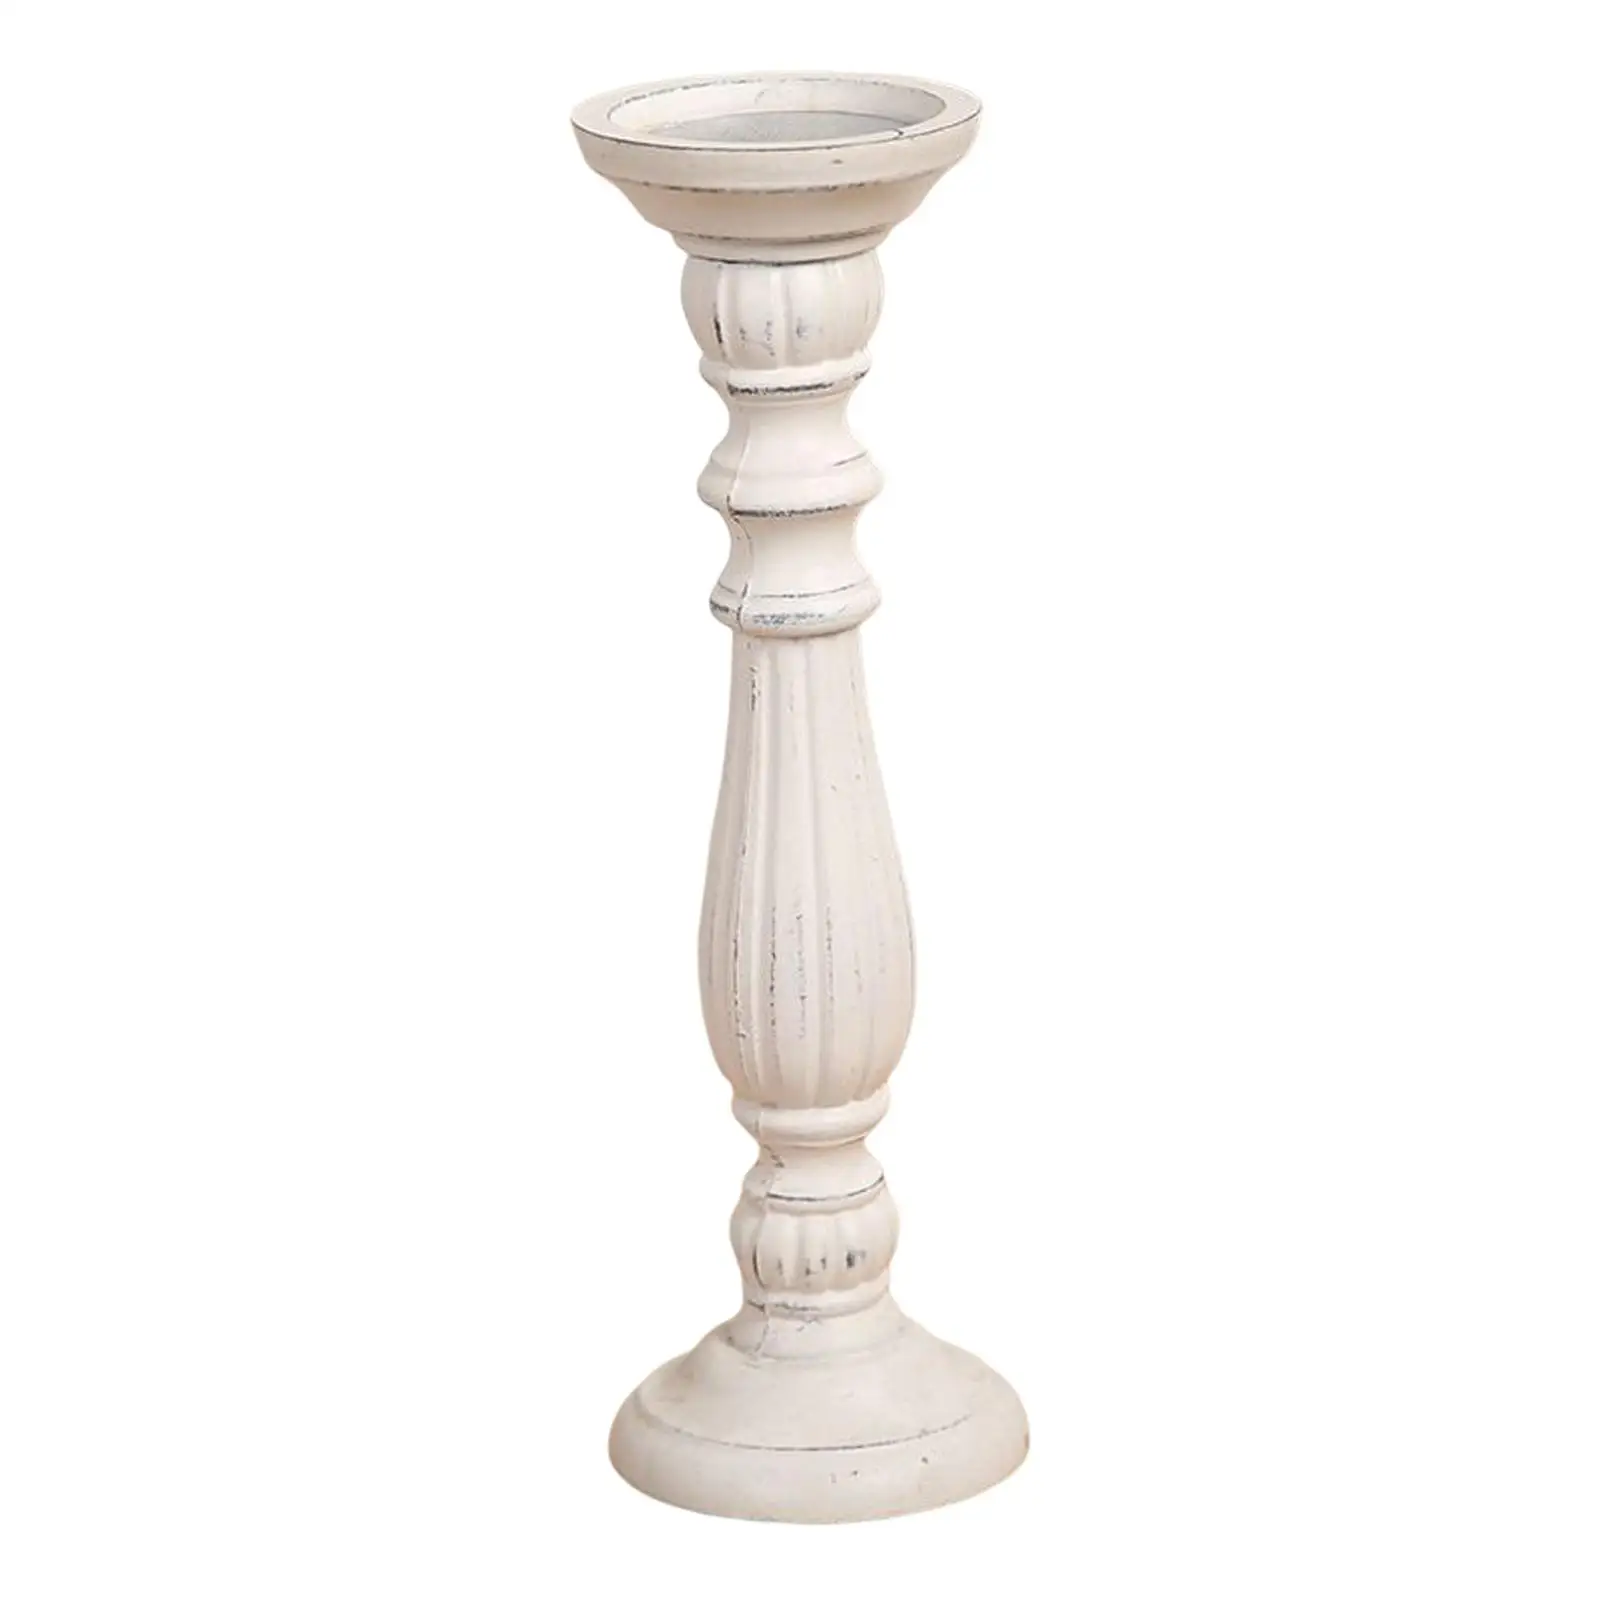 Candle Holder Table Centerpiece Photographic Prop Roman Pillar Candlestick Stand for Scenery Farmhouse Party Wedding Living Room